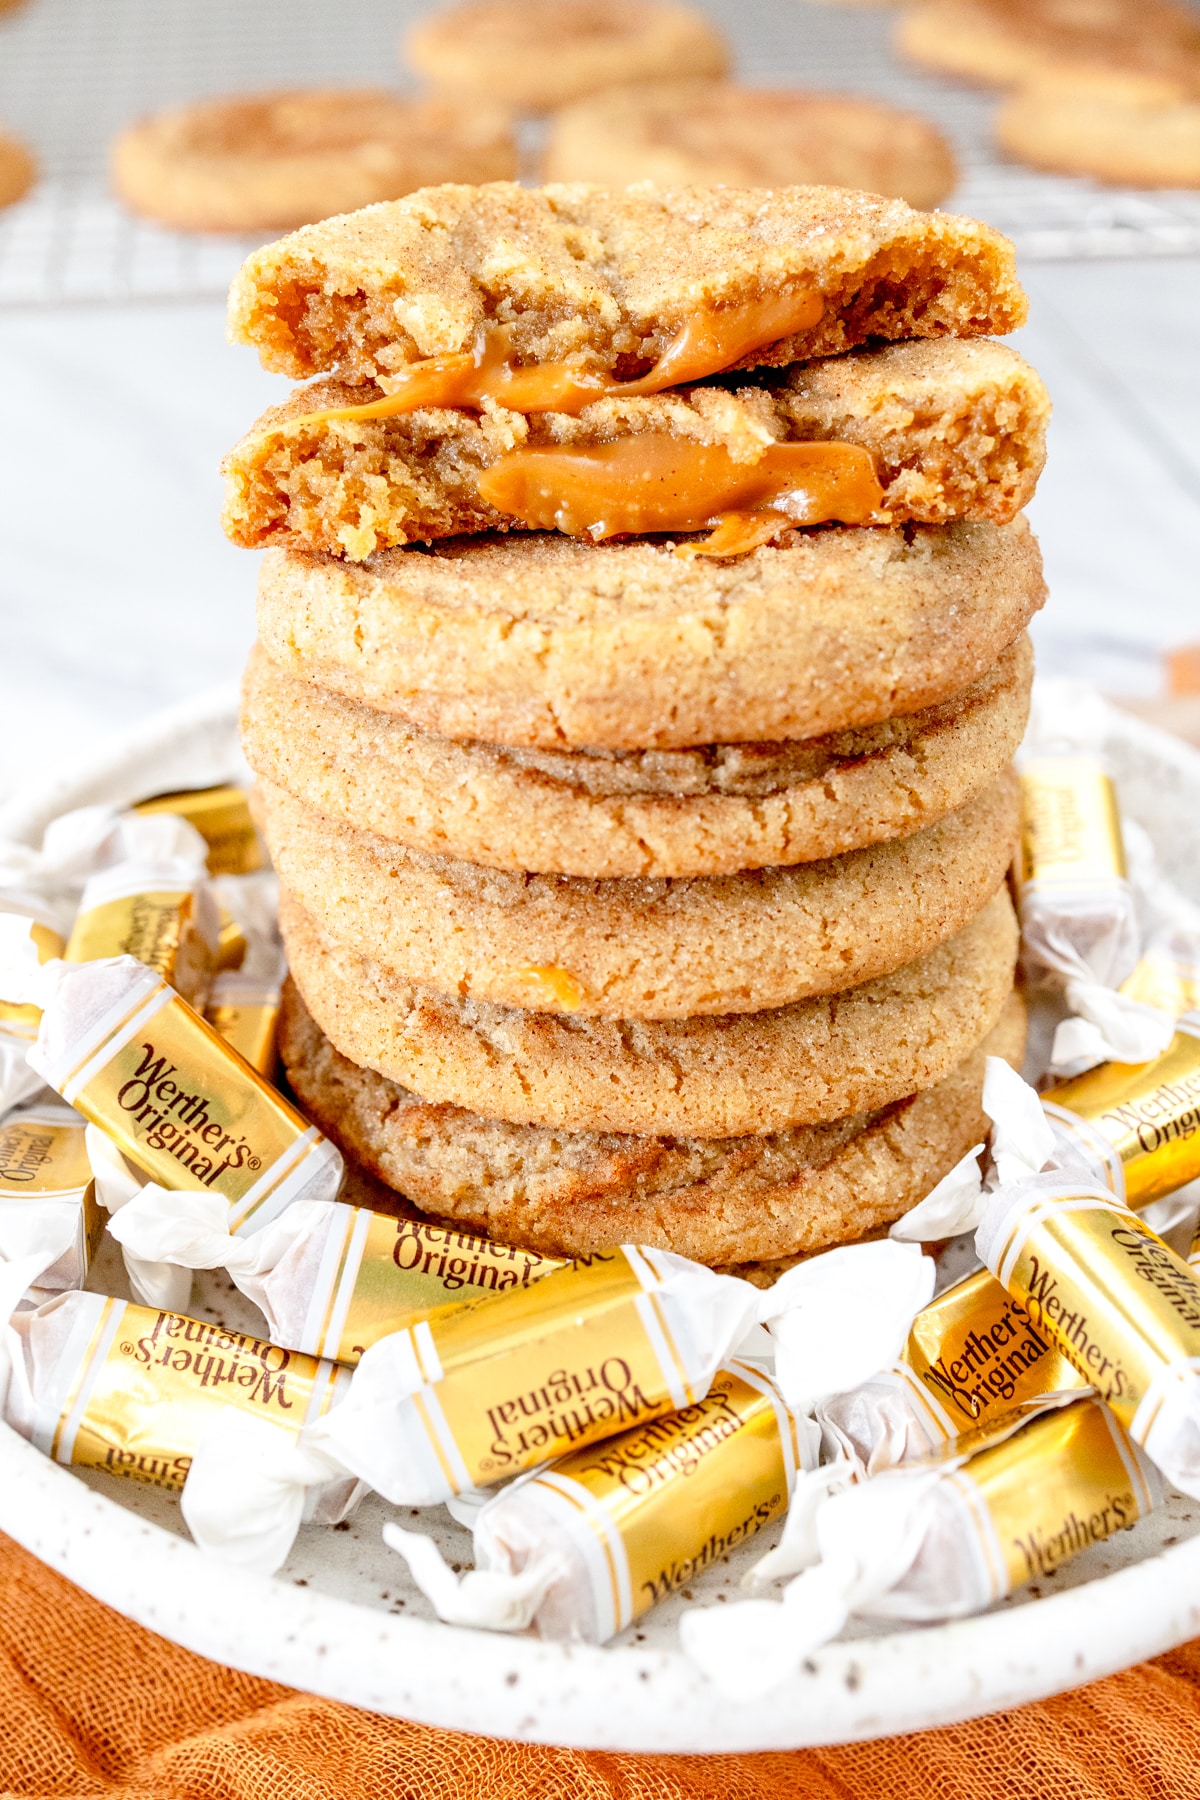 Close up of a Caramel Snickerdoodle Cookie broken in half on top of a stack of Caramel Snickerdoodle Cookies.